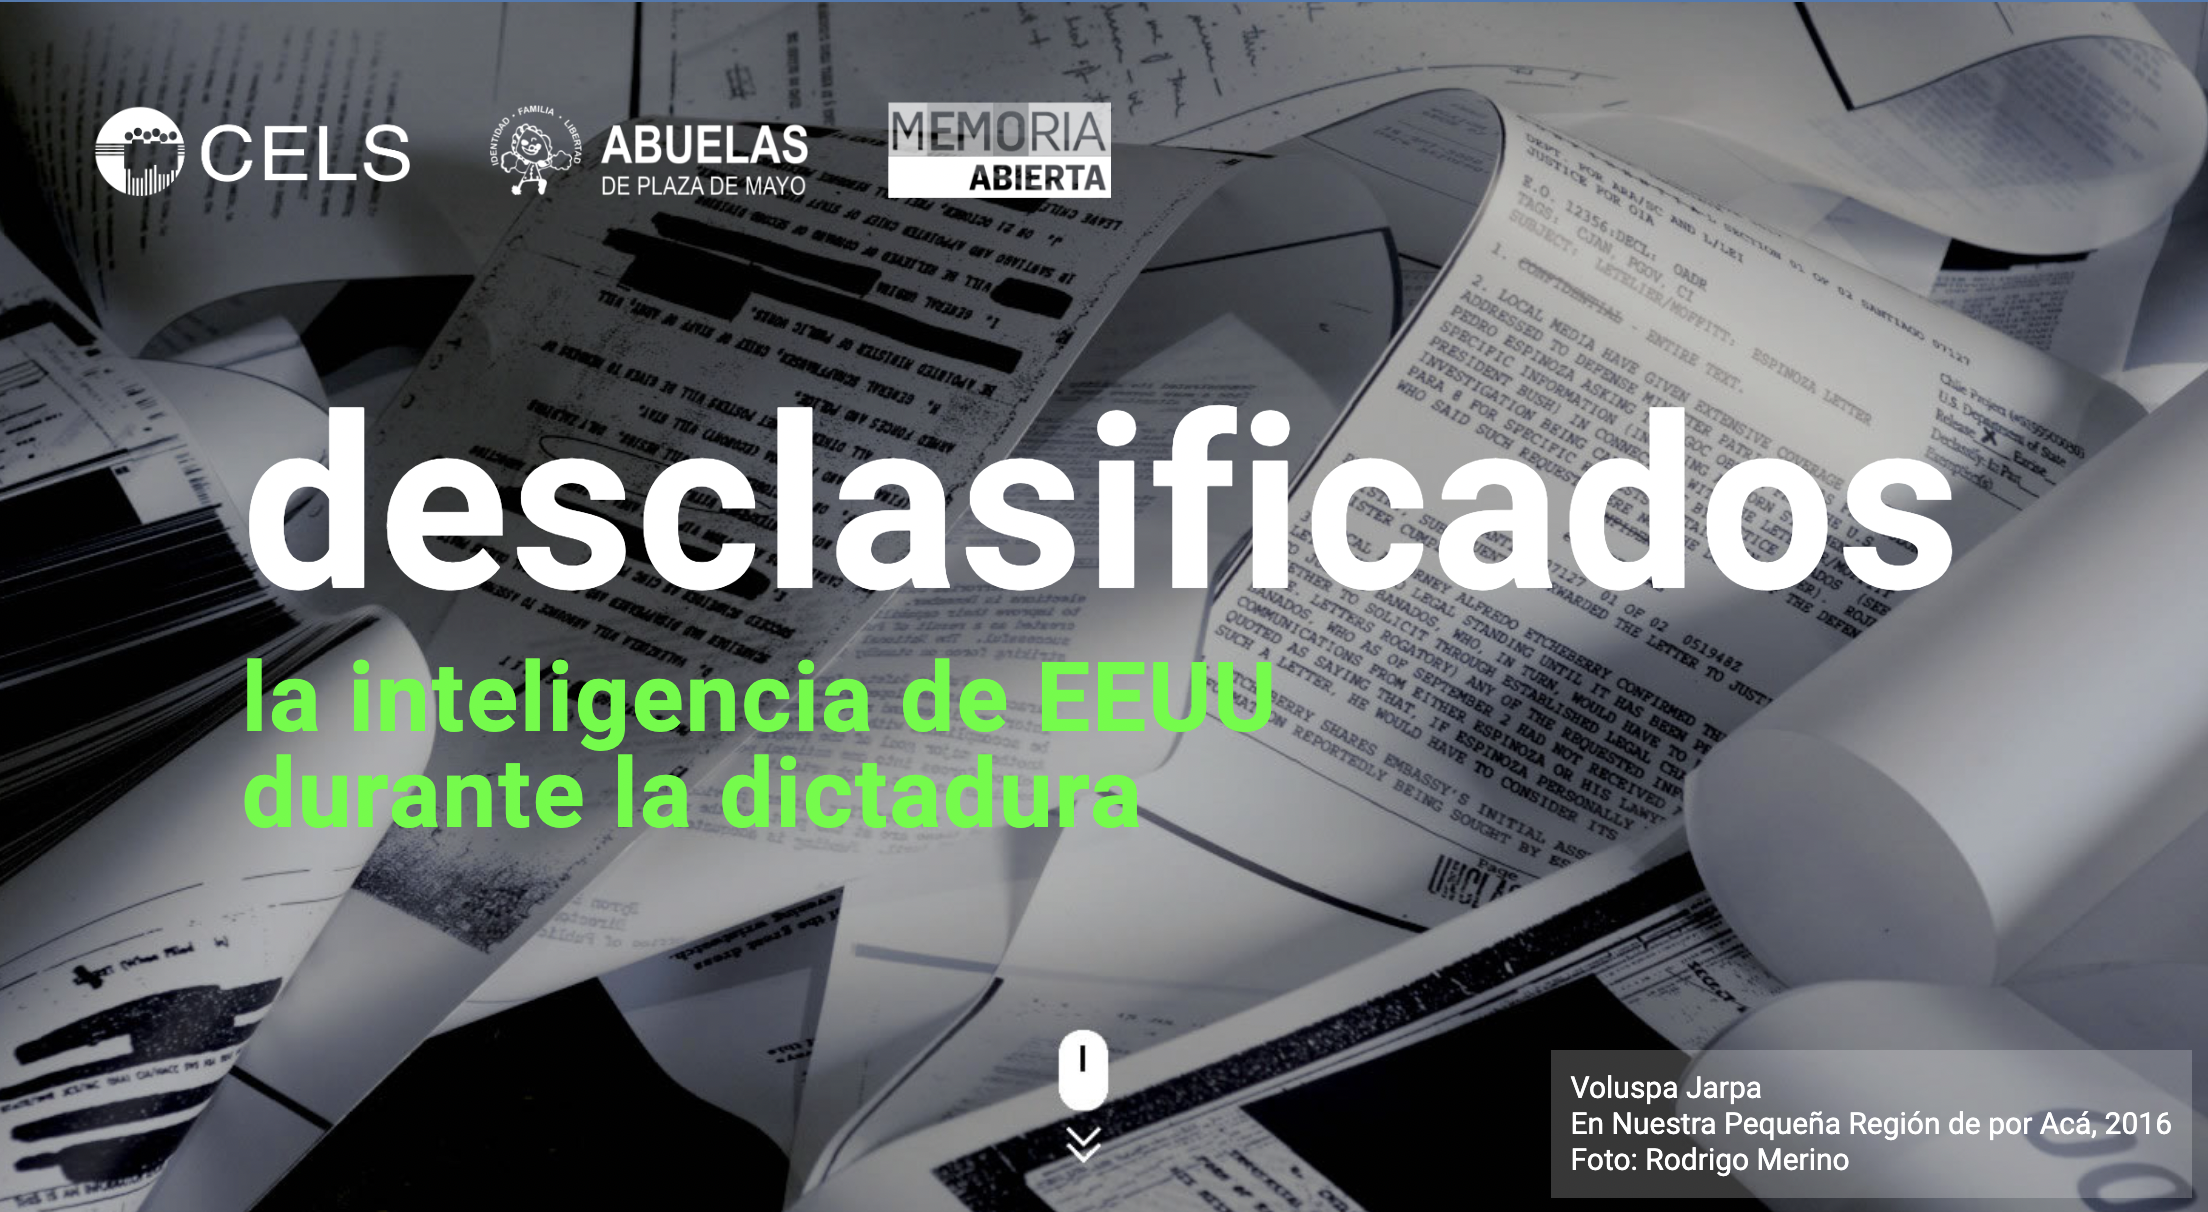 Cover of Proyecto Desclasificados journalism project website